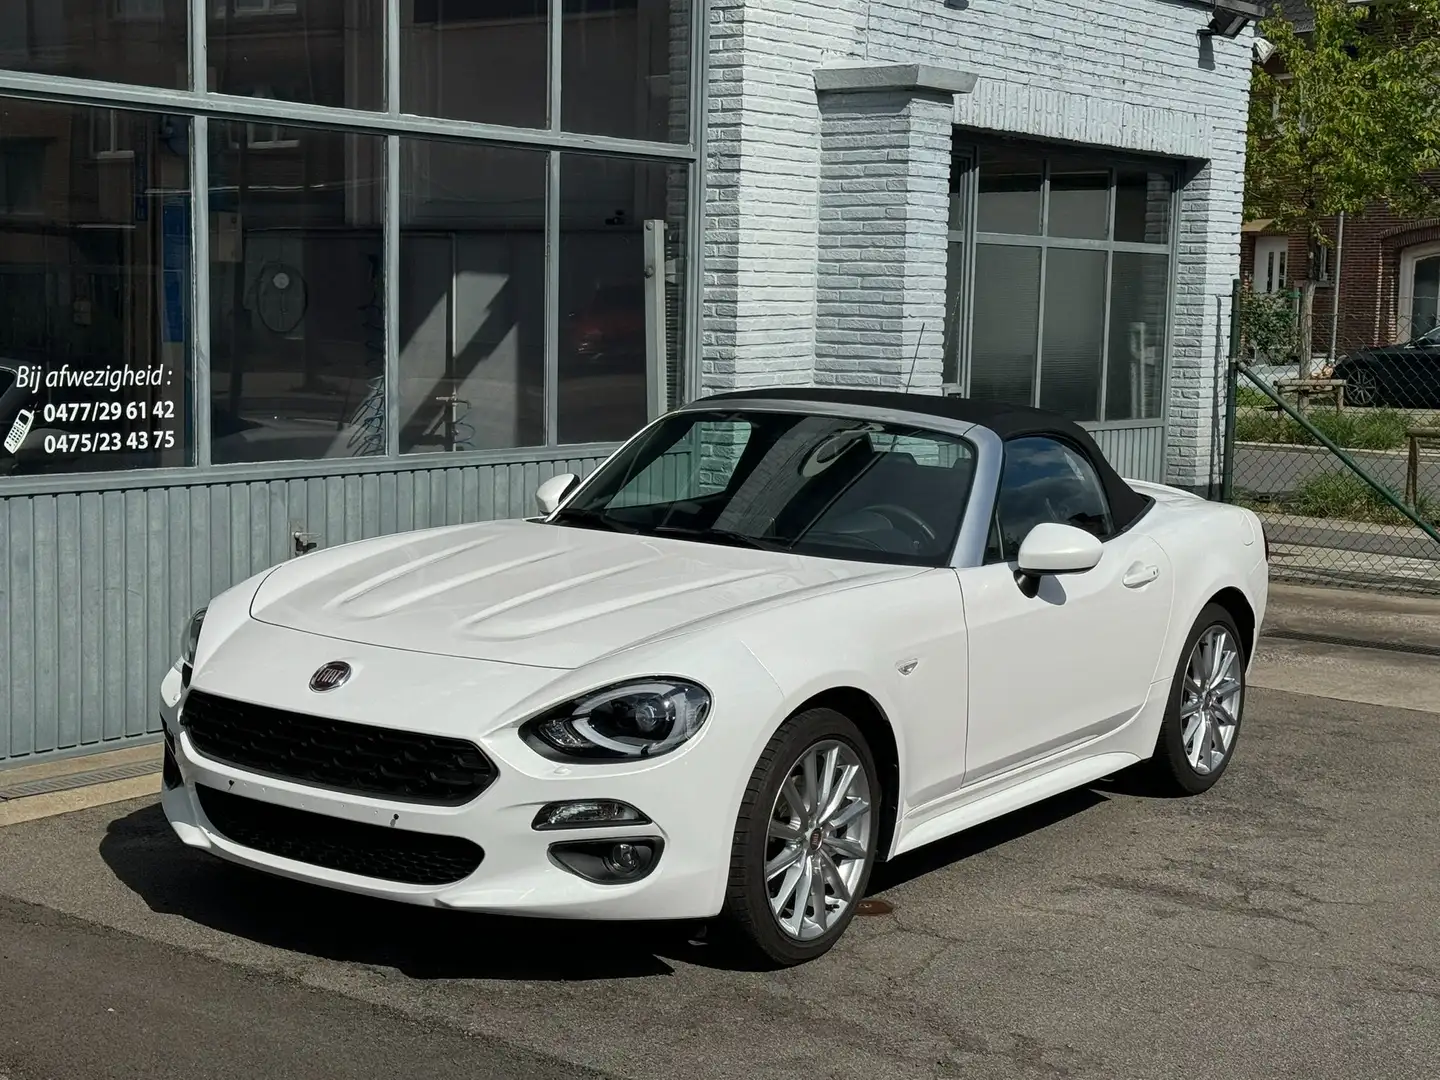 Fiat 124 Spider 1.4 MultiAir Lusso Cuir Gps Caméra 15.000kms✅ White - 1